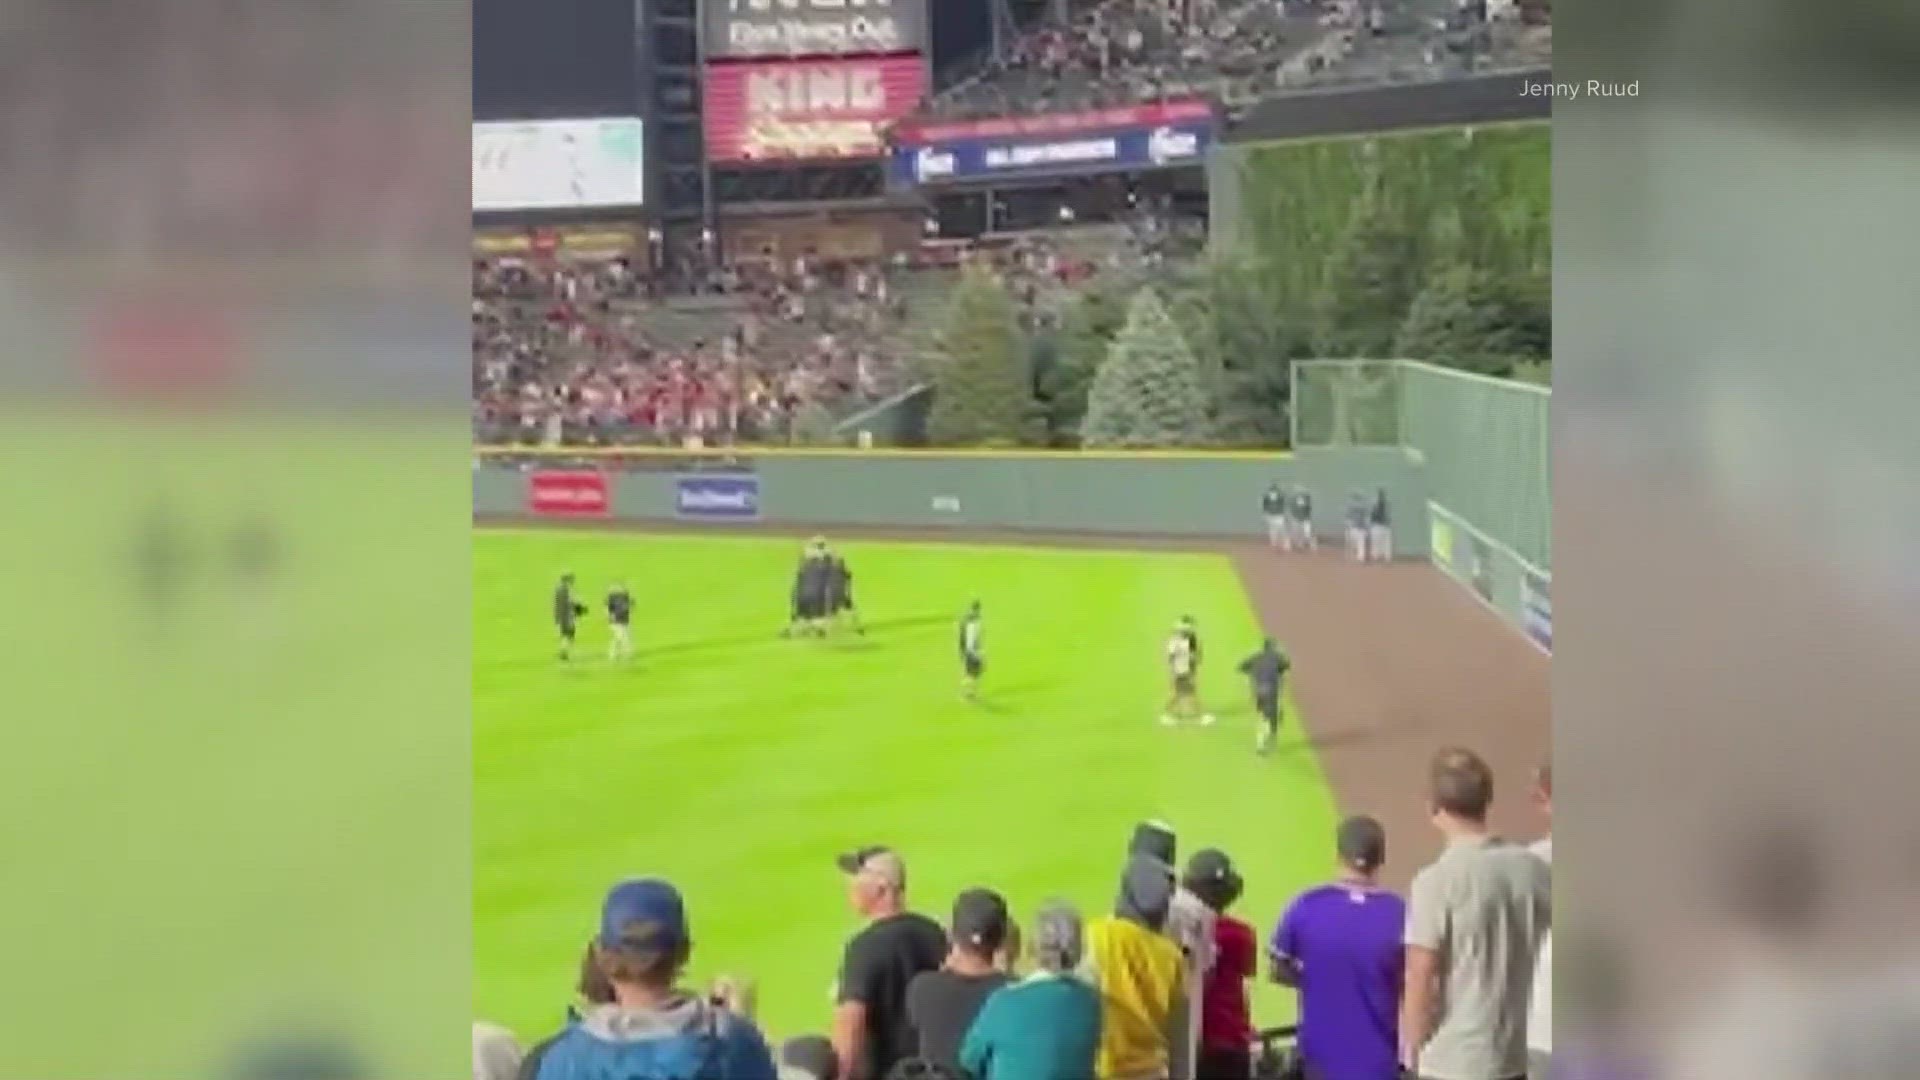 Braves player Ronald Acuña Jr. said he was OK after fending off the fans, including one who knocked him over.